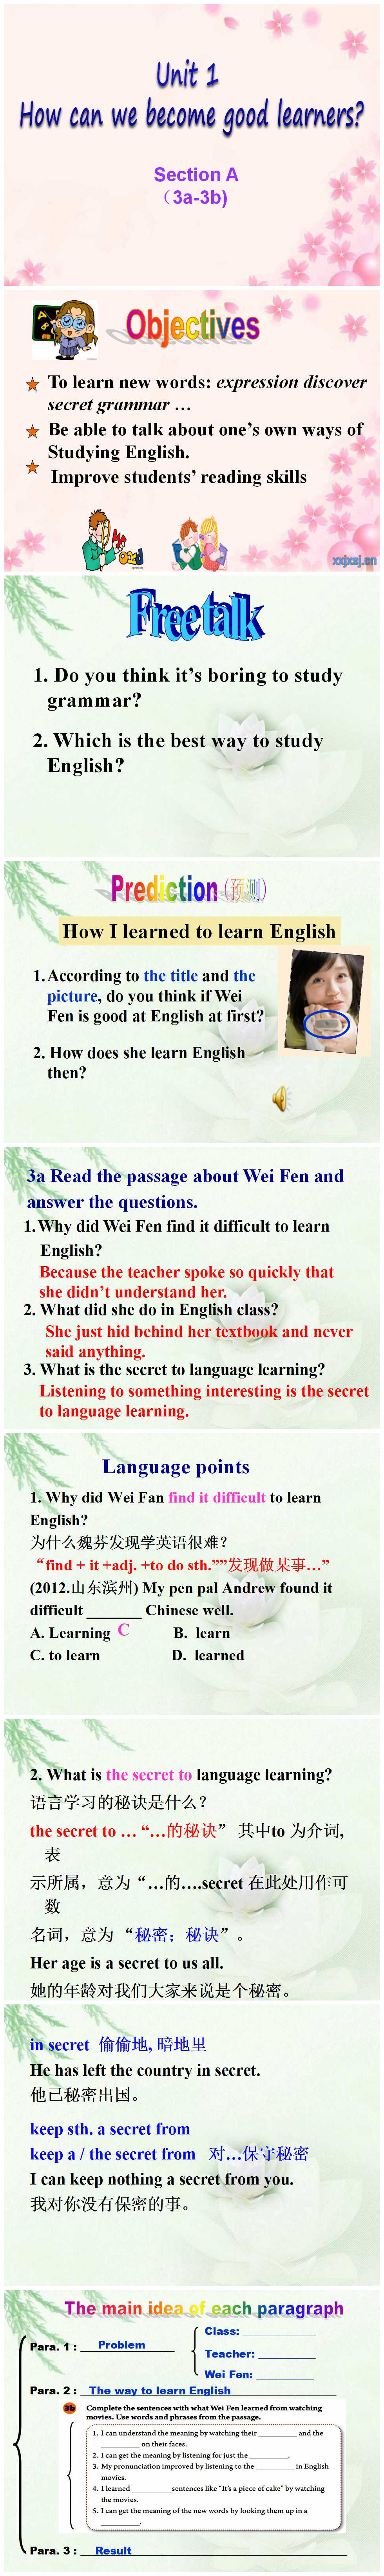 《How can we become good learners?》PPT课件12